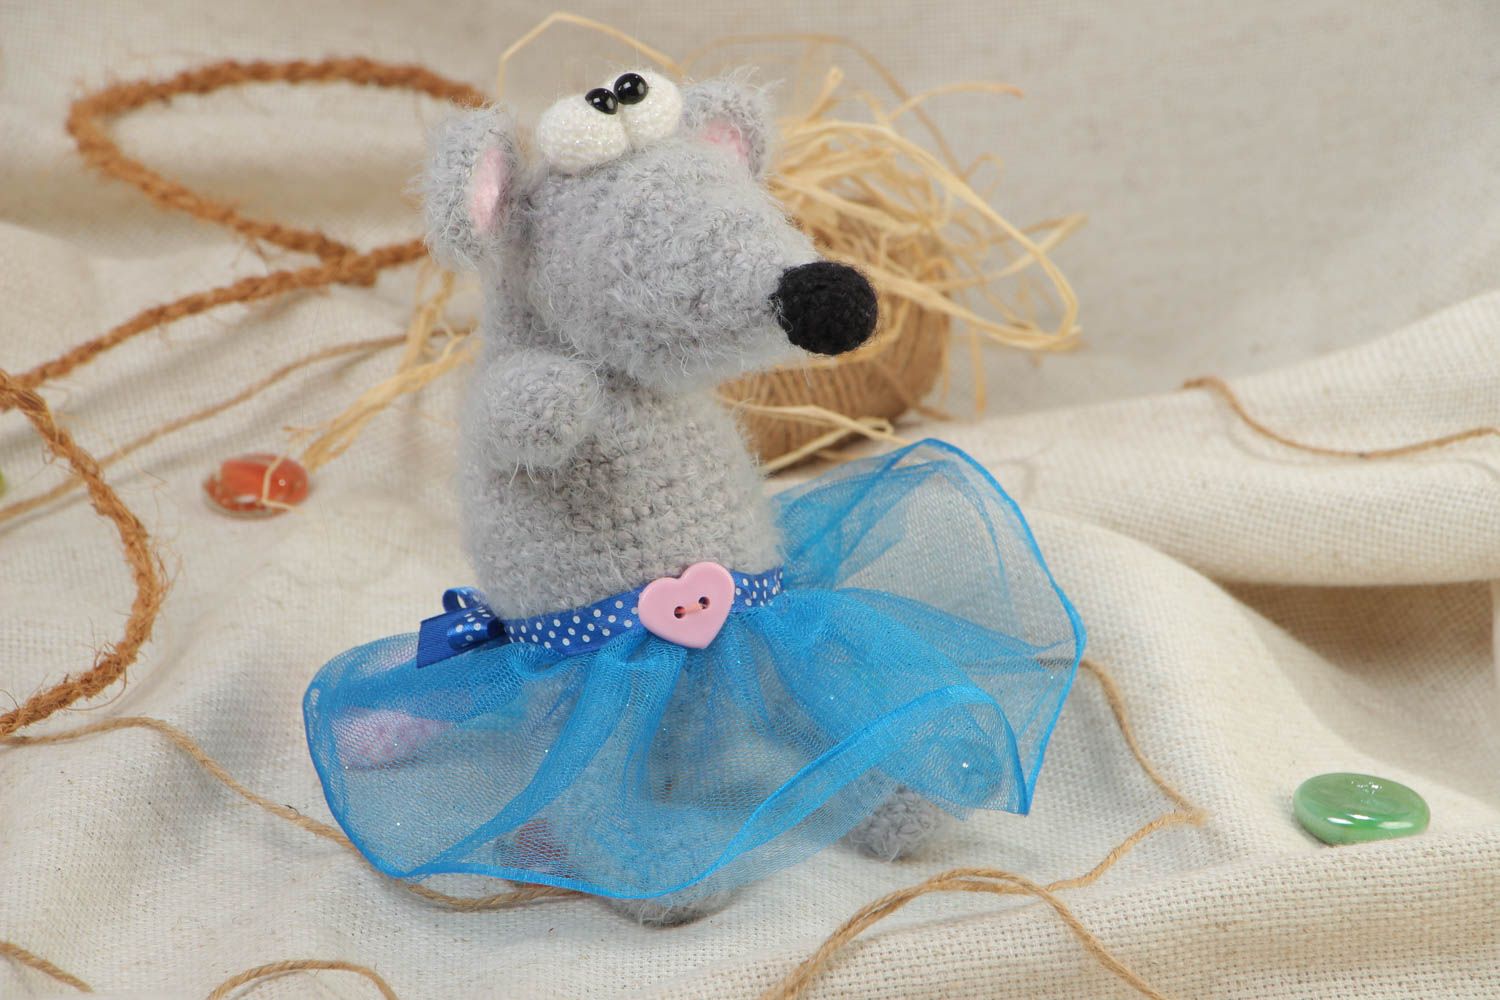 Handmade soft toy crocheted of acrylic threads gray mouse in blue tutu skirt photo 1